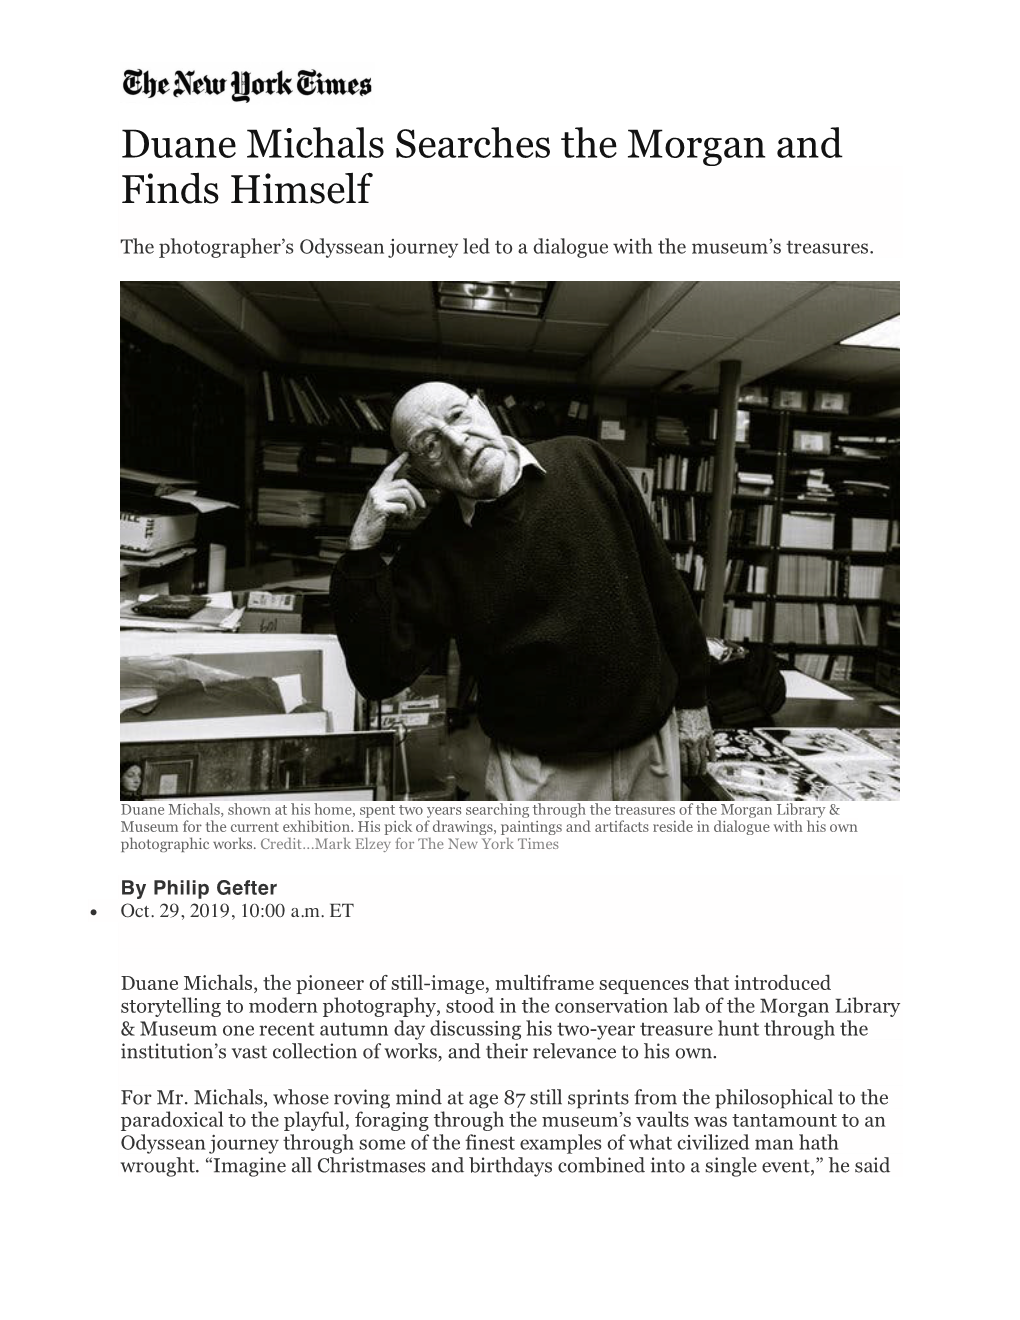 New York Times: Duane Michals Searches The